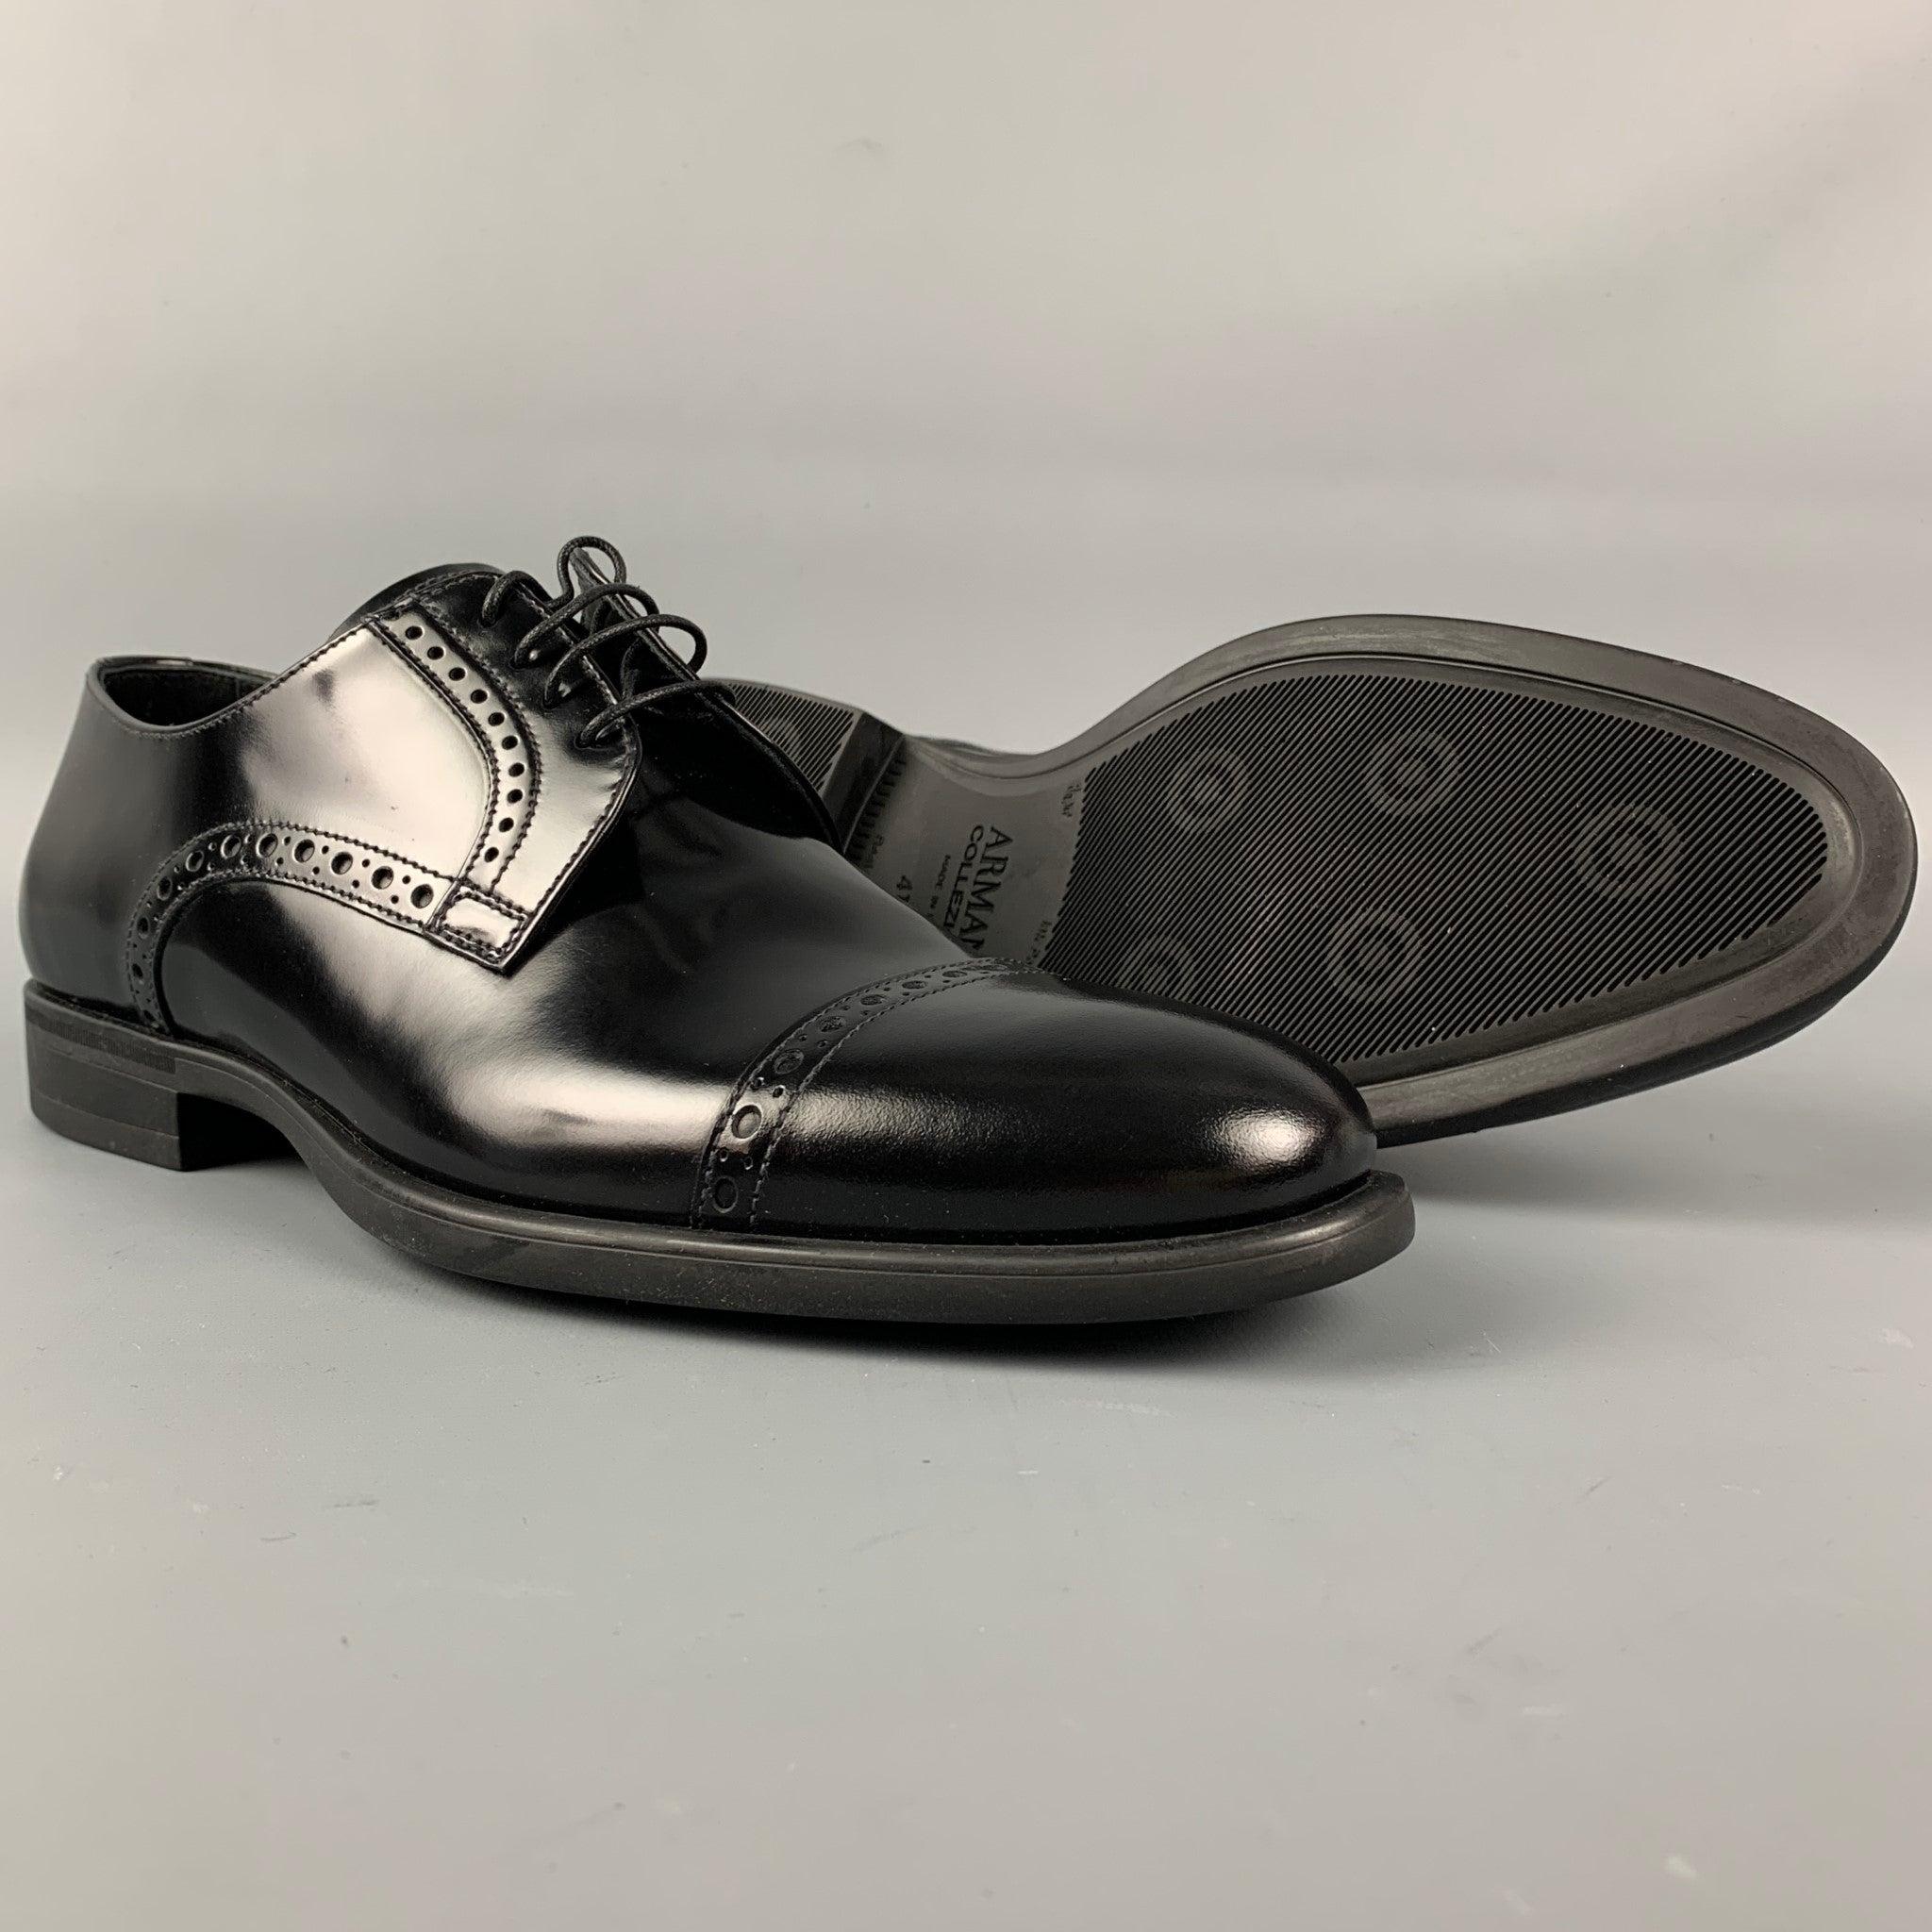 ARMANI COLLEZIONI Size 8 Black Perforated Cap Toe Lace Up Shoes In Good Condition For Sale In San Francisco, CA